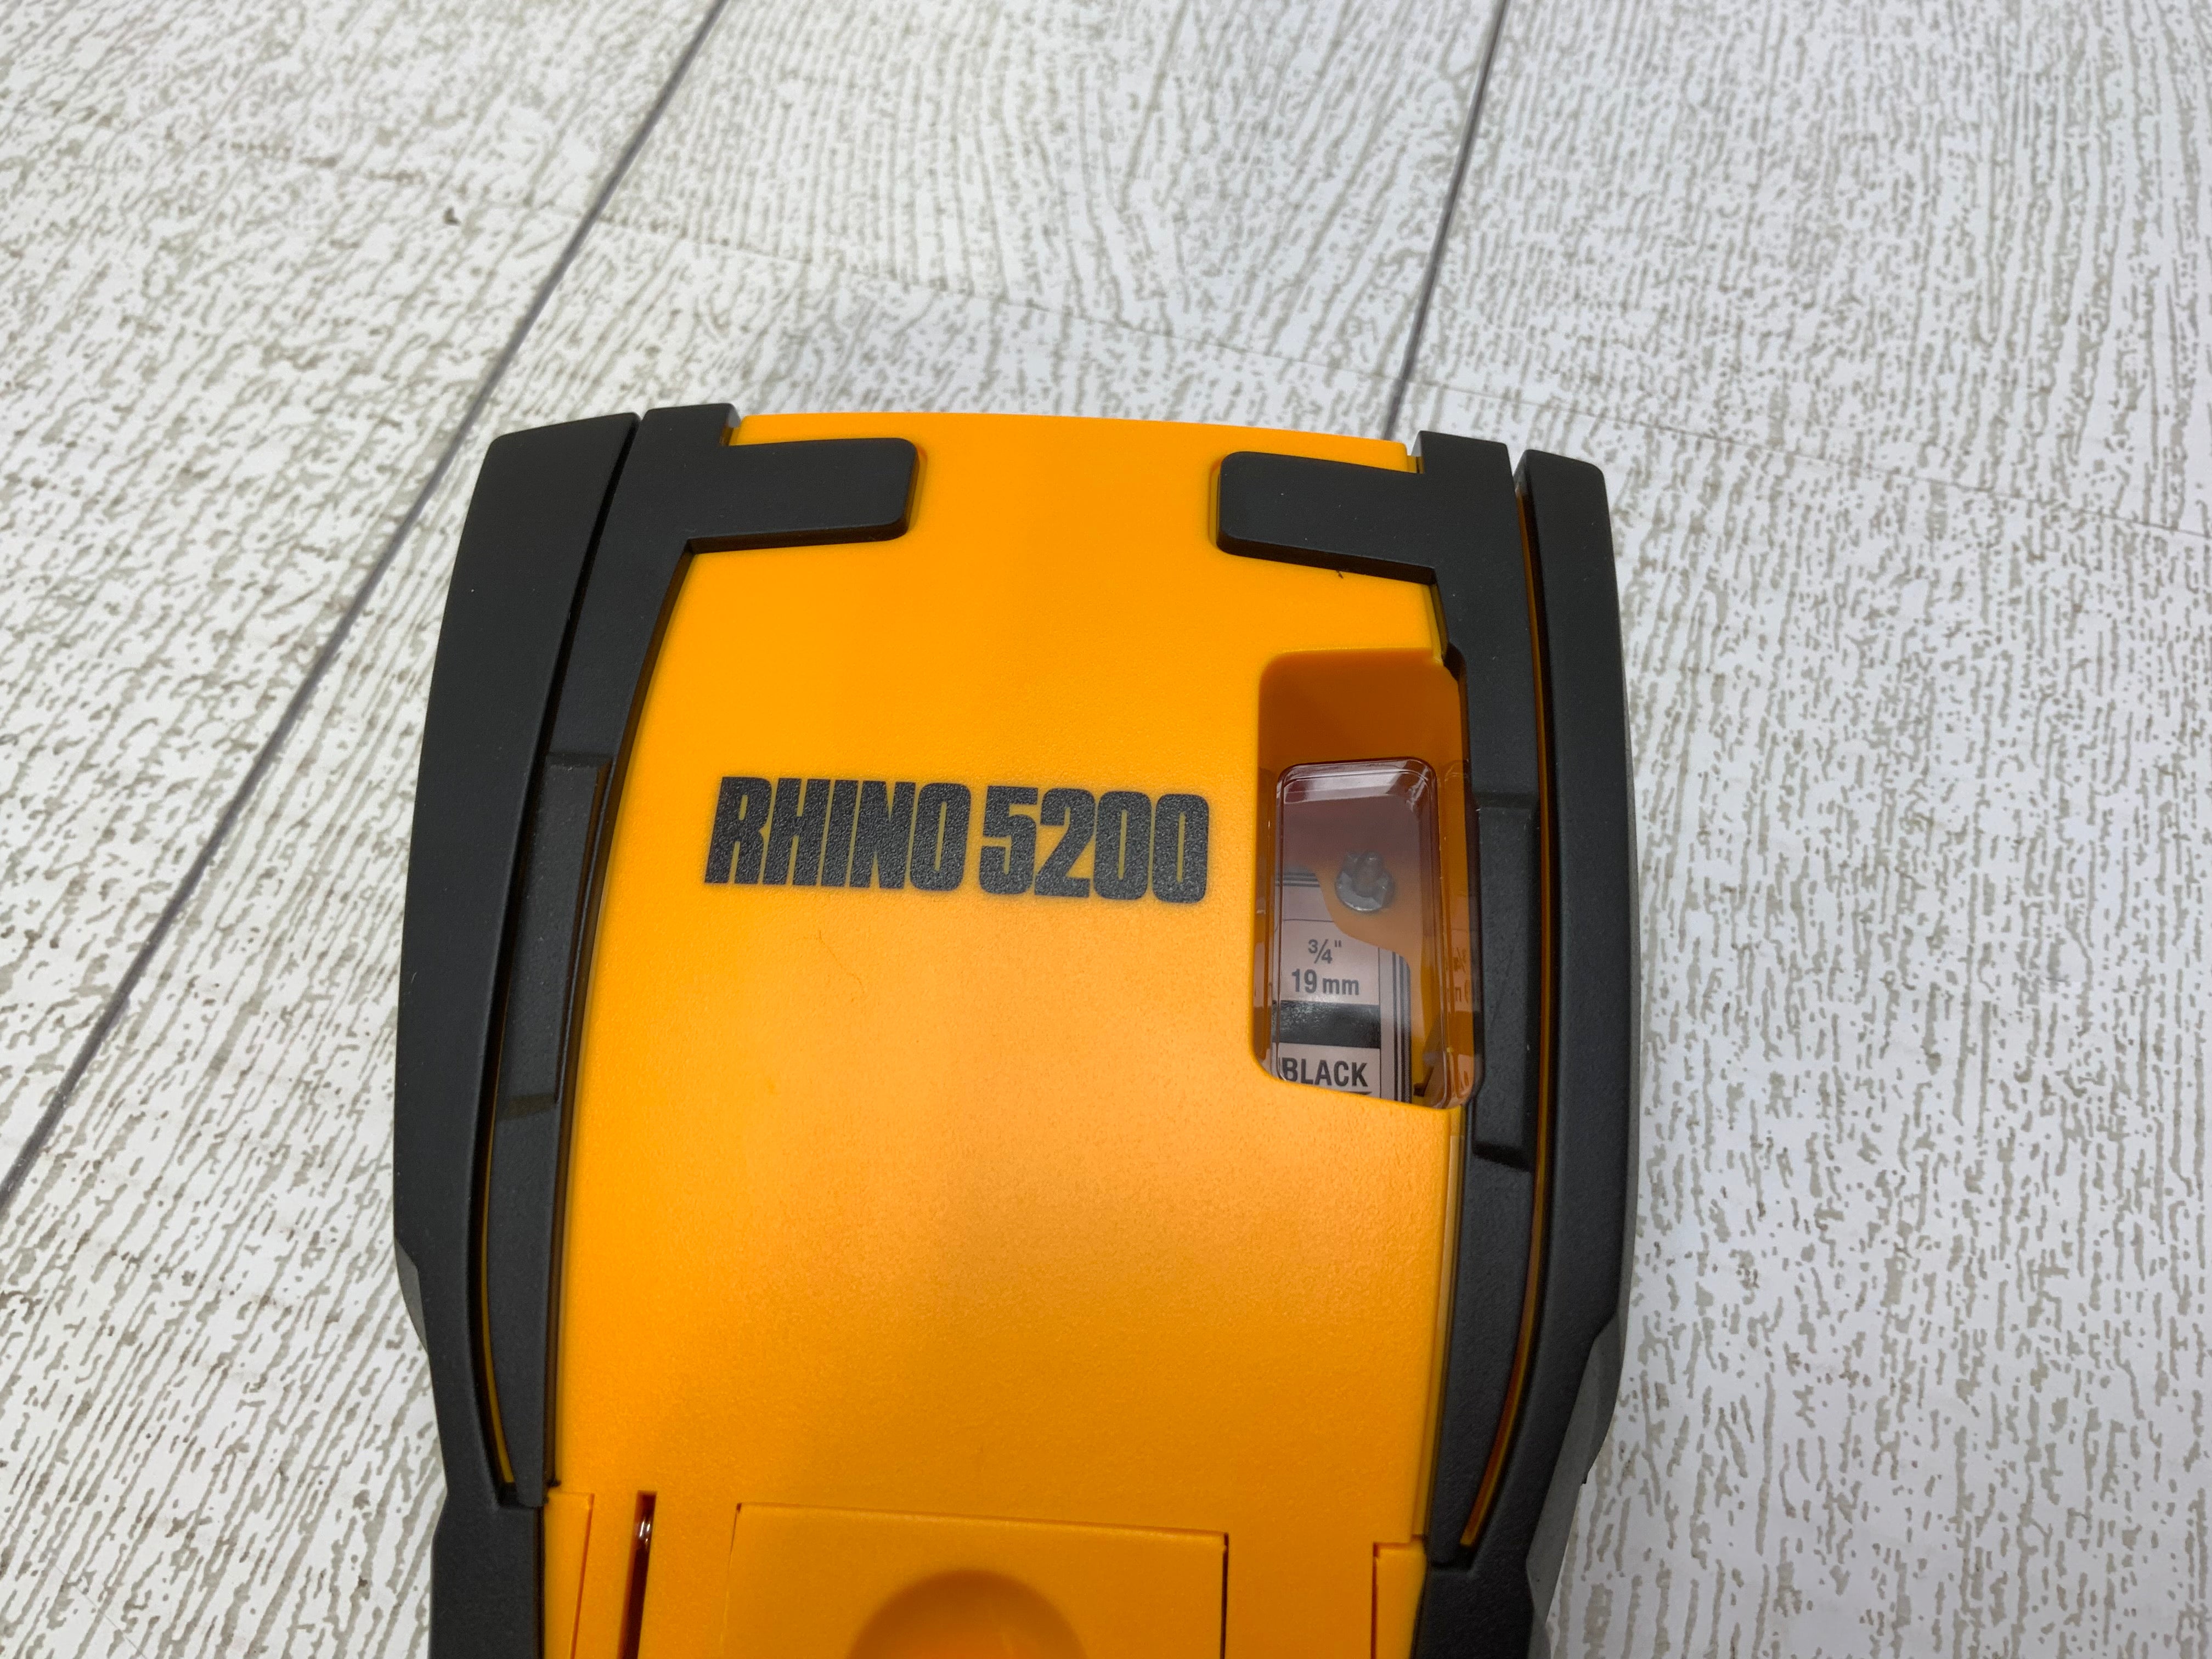 DYMO Rhino 5200 Industrial Portable Thermal Transfer Electronic Label Maker (7928451596526)